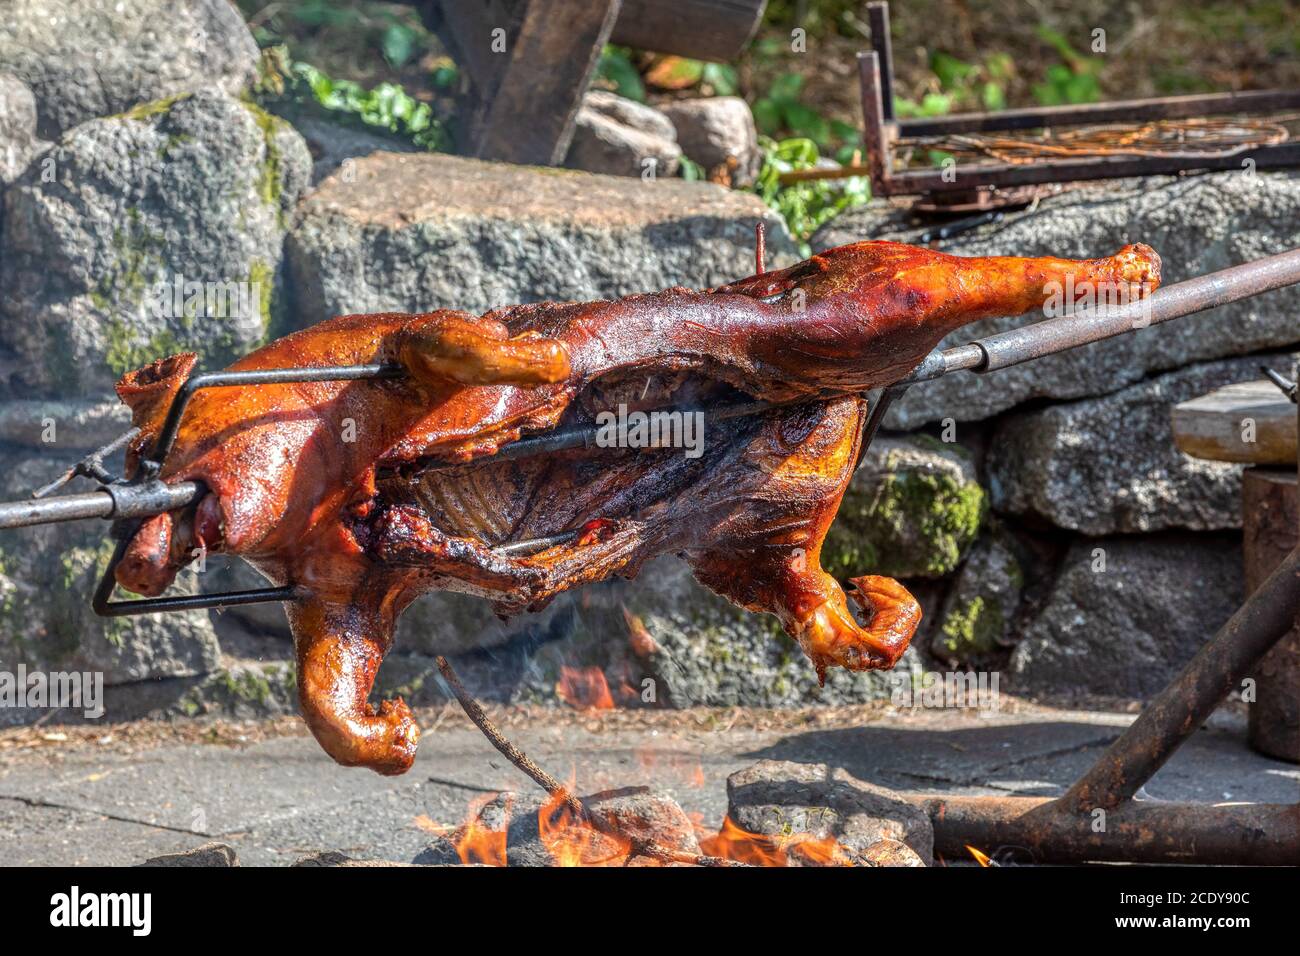 Piglet on the spit, open fire grill in outdoor Stock Photo